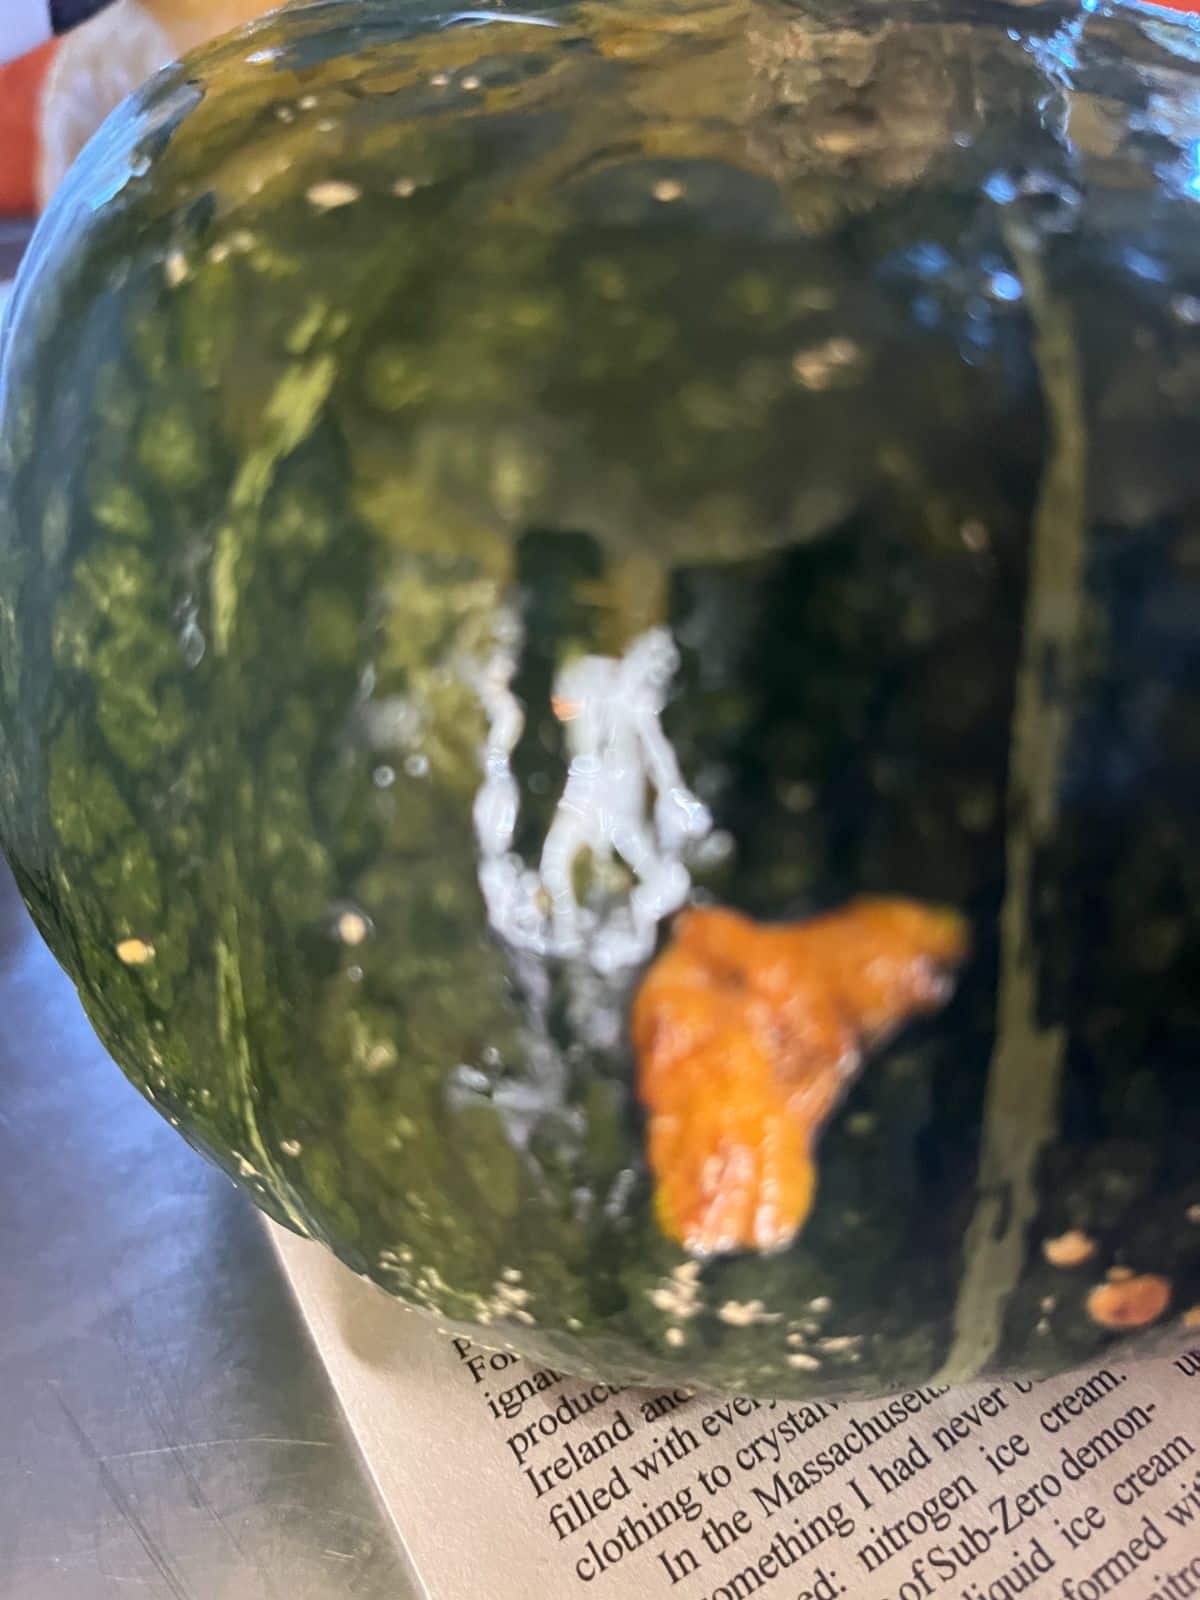 A Kobocha squash with a knick in it